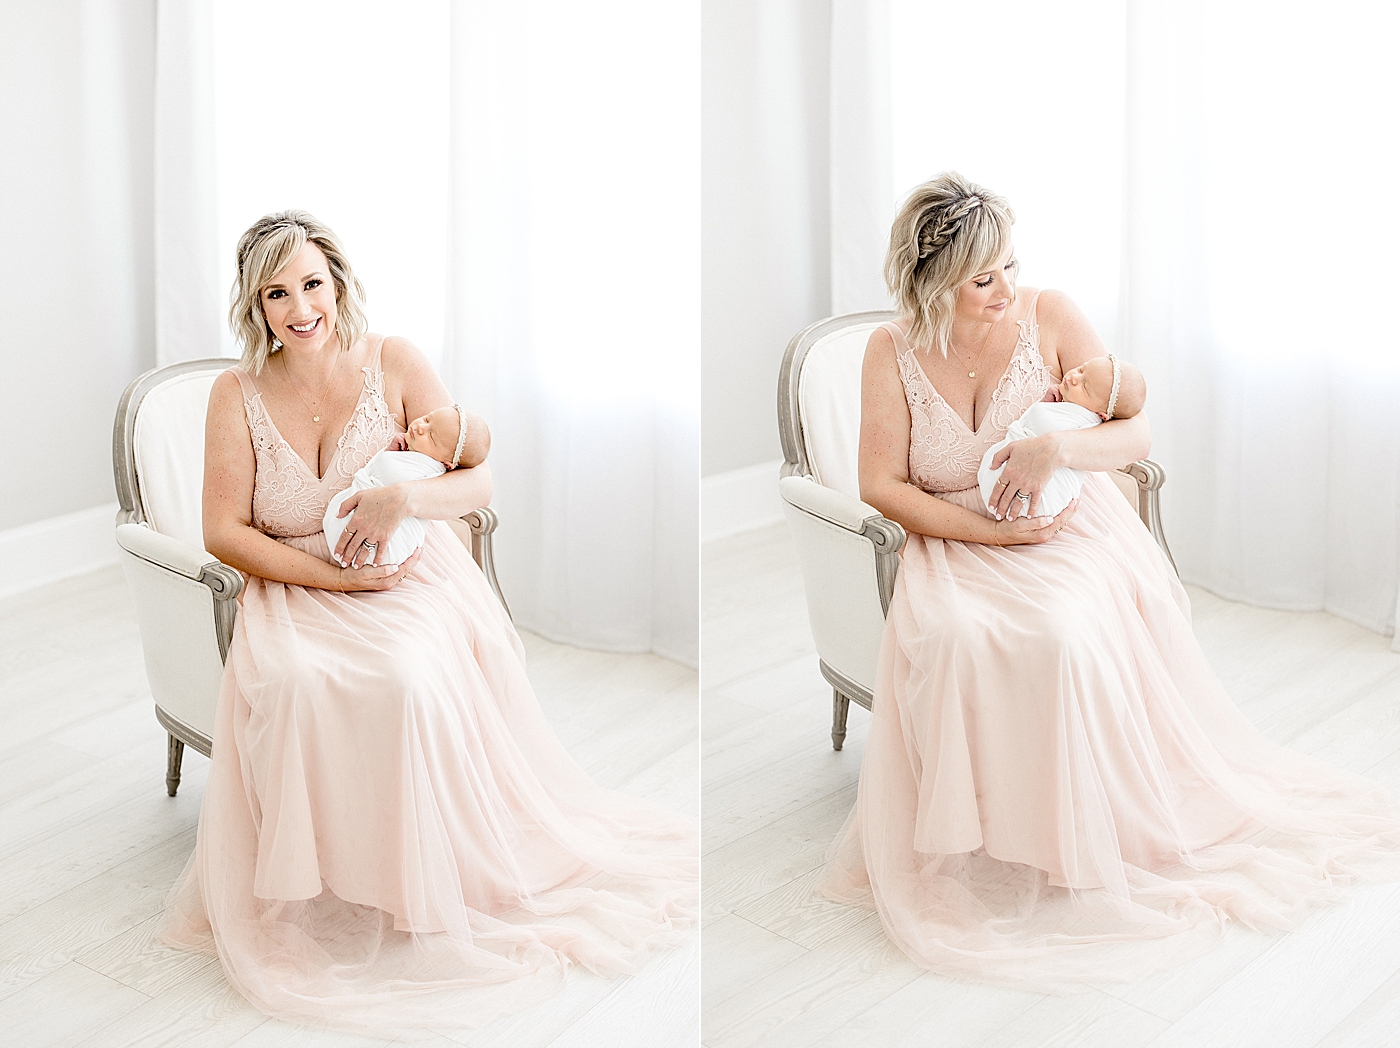 Mom sitting in chair holding newborn baby girl. Photo by Brittany Elise Photography.